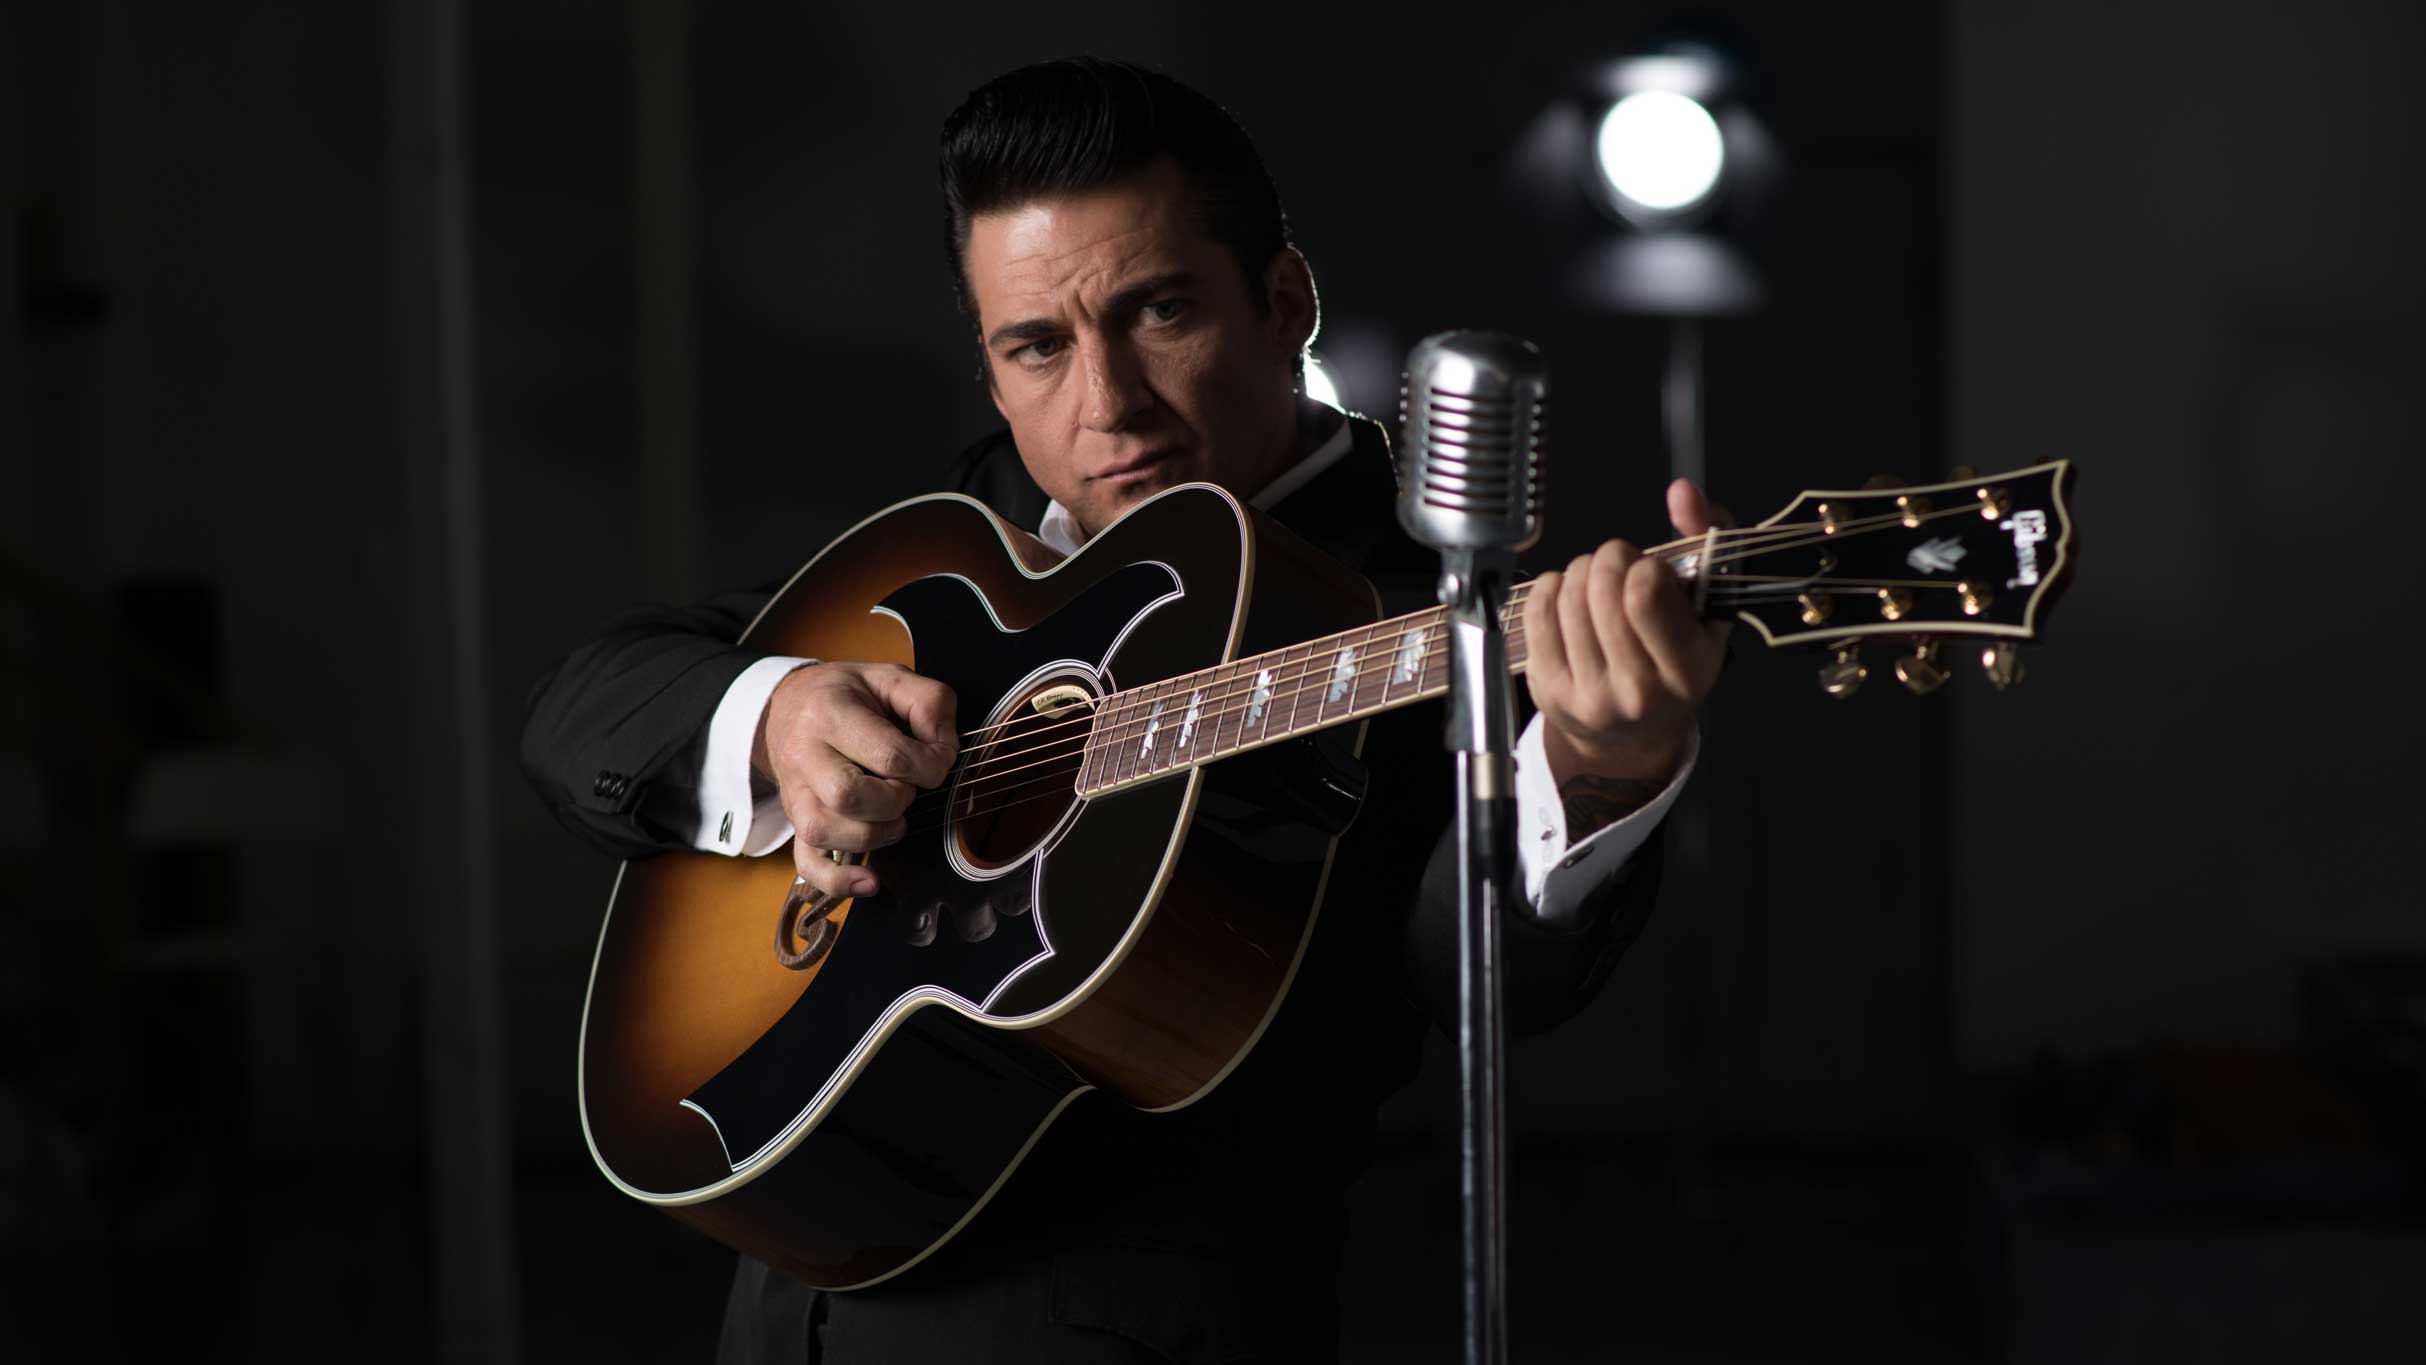 The Man In Black: Tribute To Johnny Cash in Charles Town promo photo for Official Platinum presale offer code